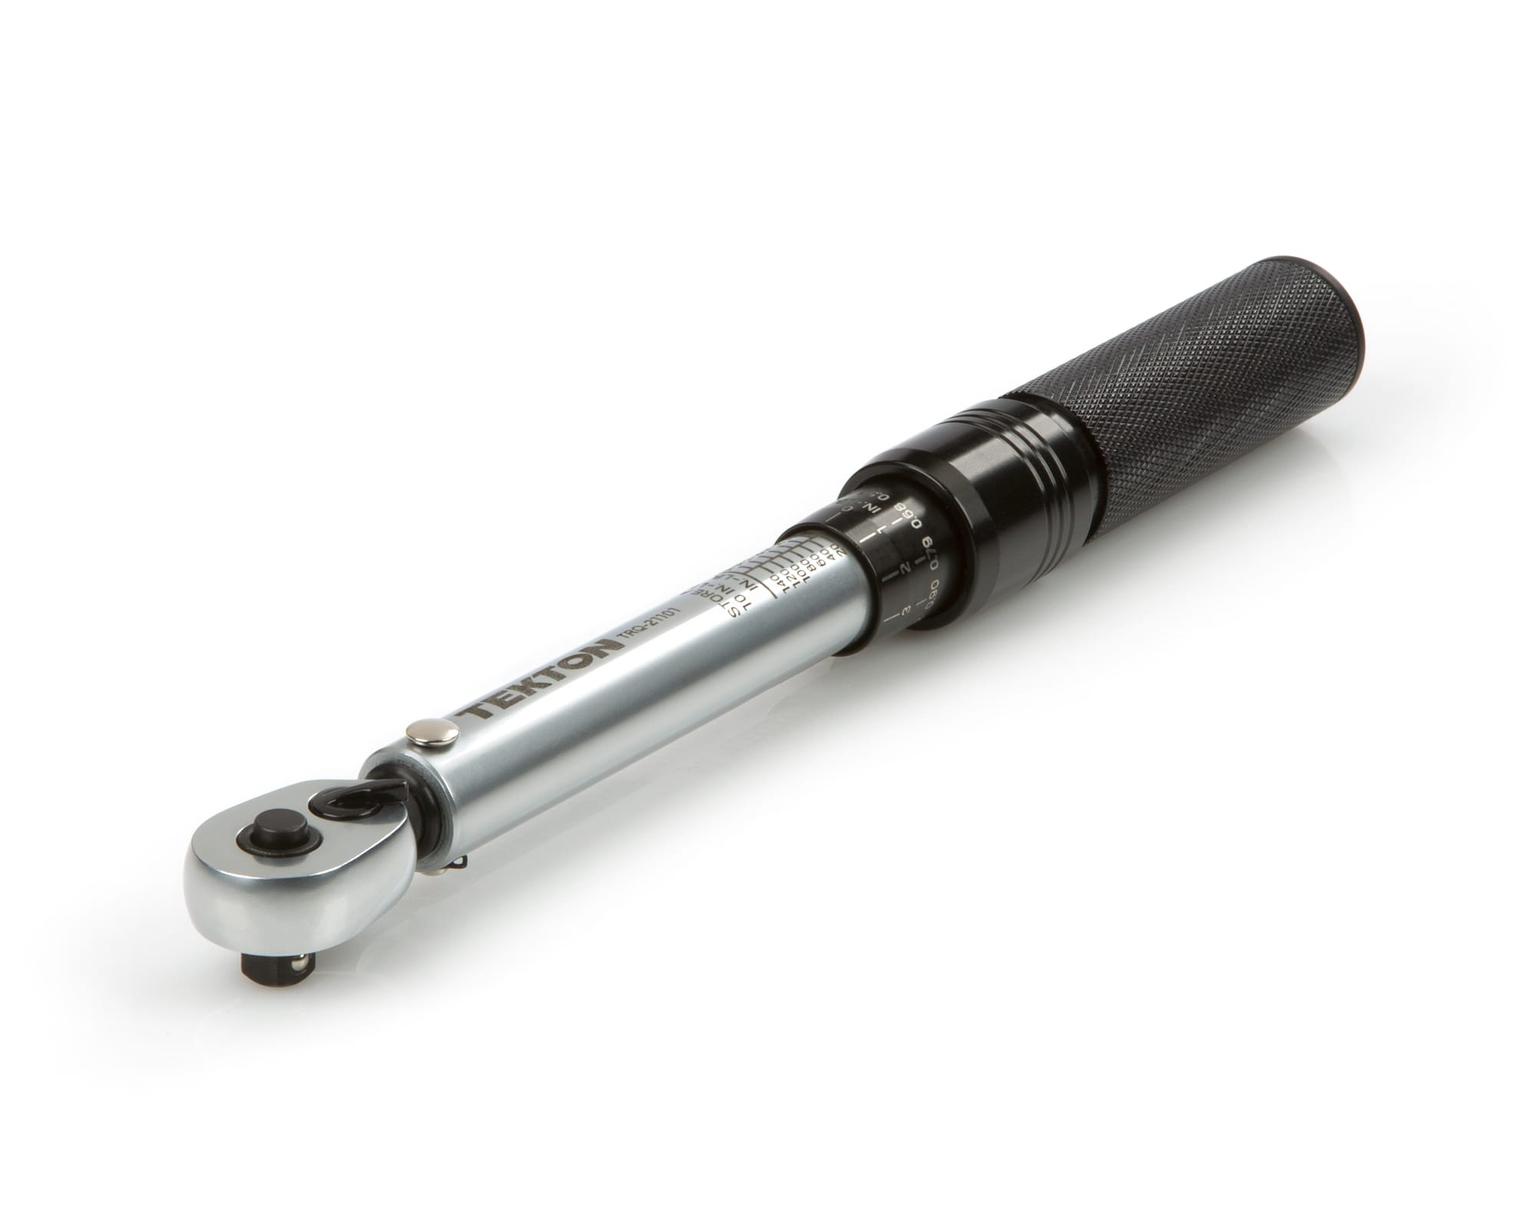 TEKTON TRQ21101-D 1/4 Inch Drive Dual-Direction Micrometer Torque Wrench (10-150 in.-lb.)